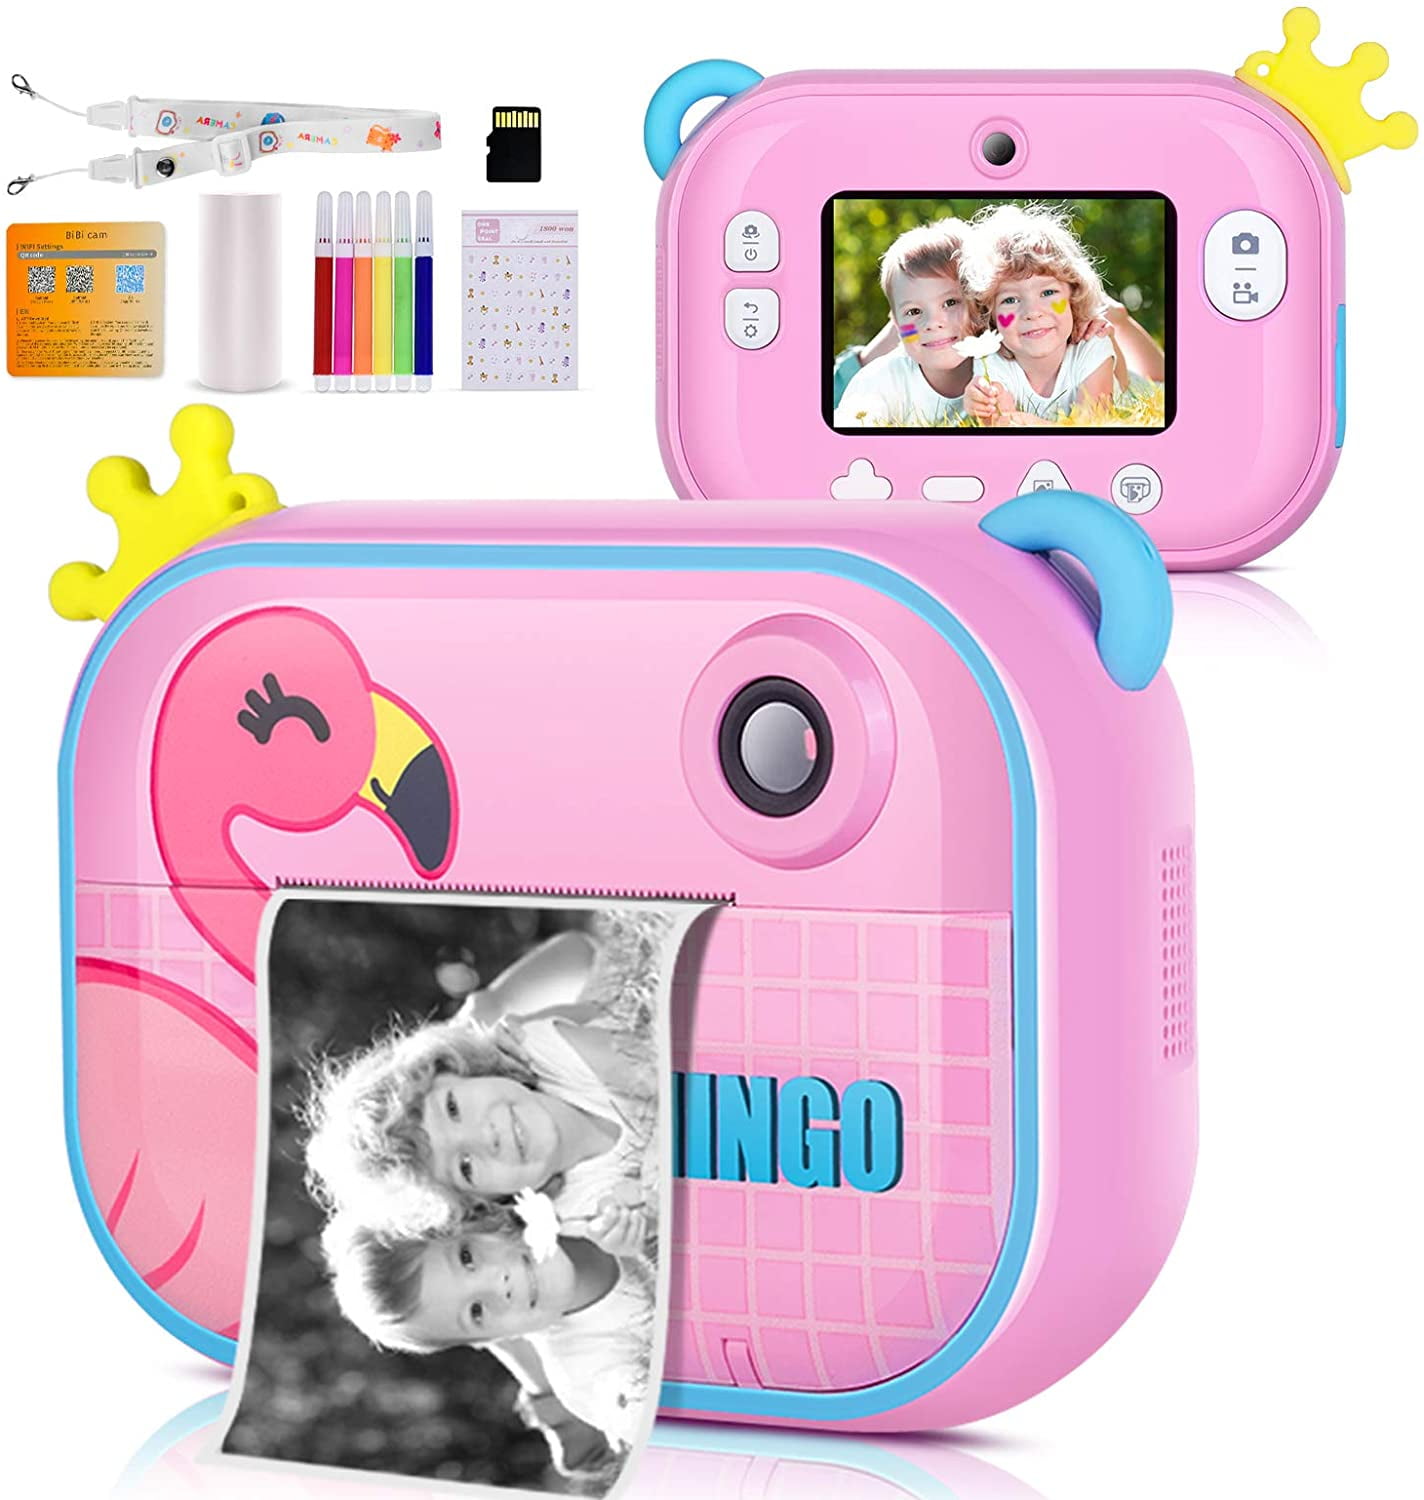 Instant Print Camera for Kids,Zero Ink Kids Camera with Print Paper,Selfie  Video Digital Camera with HD 1080P 2.4 Inch IPS Screen,3-14 Years Old  Children Toy Learning Camera for 